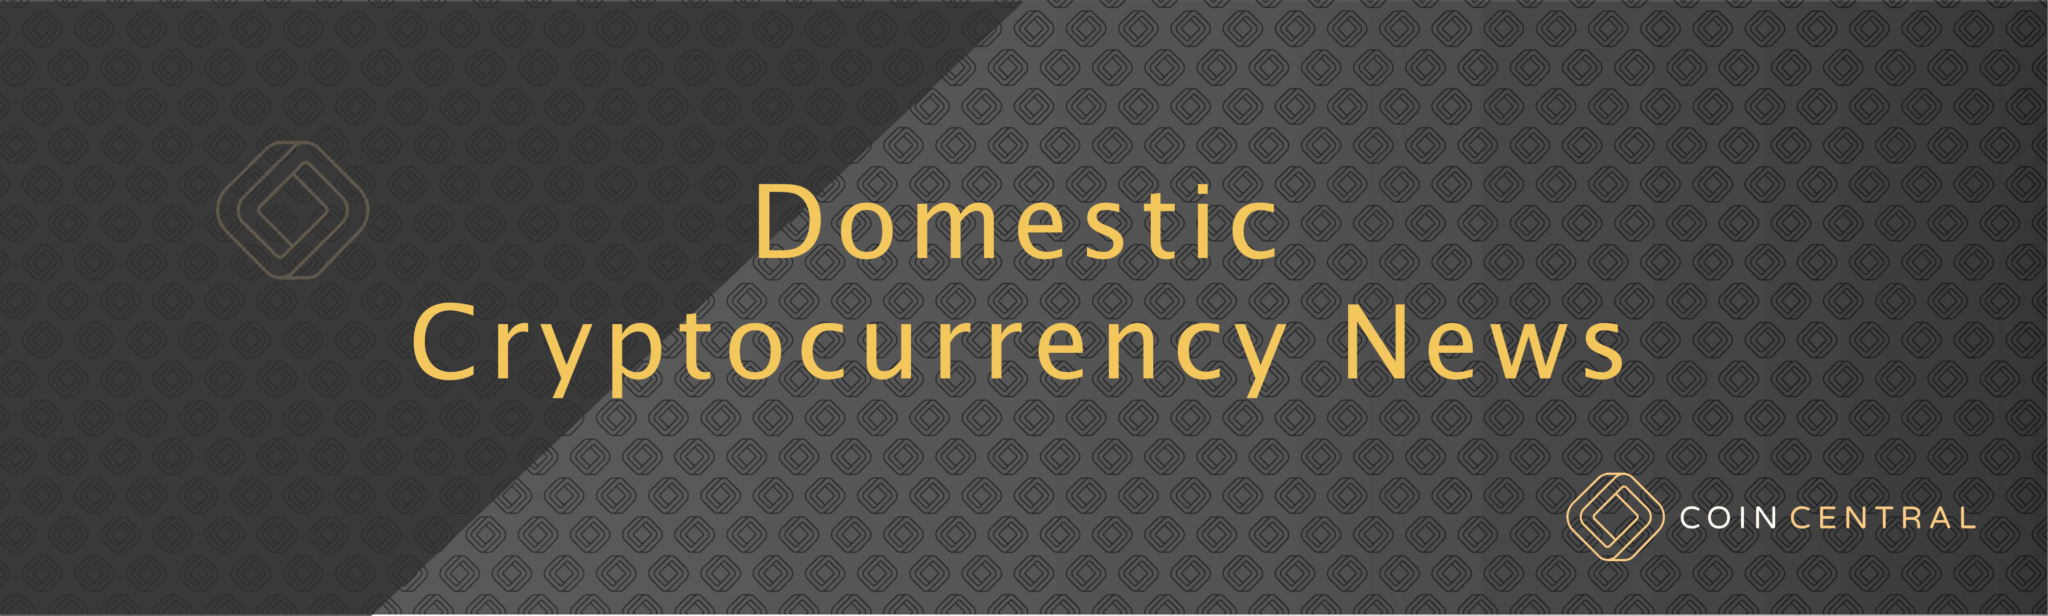   Domestic Cryptocurrency News 